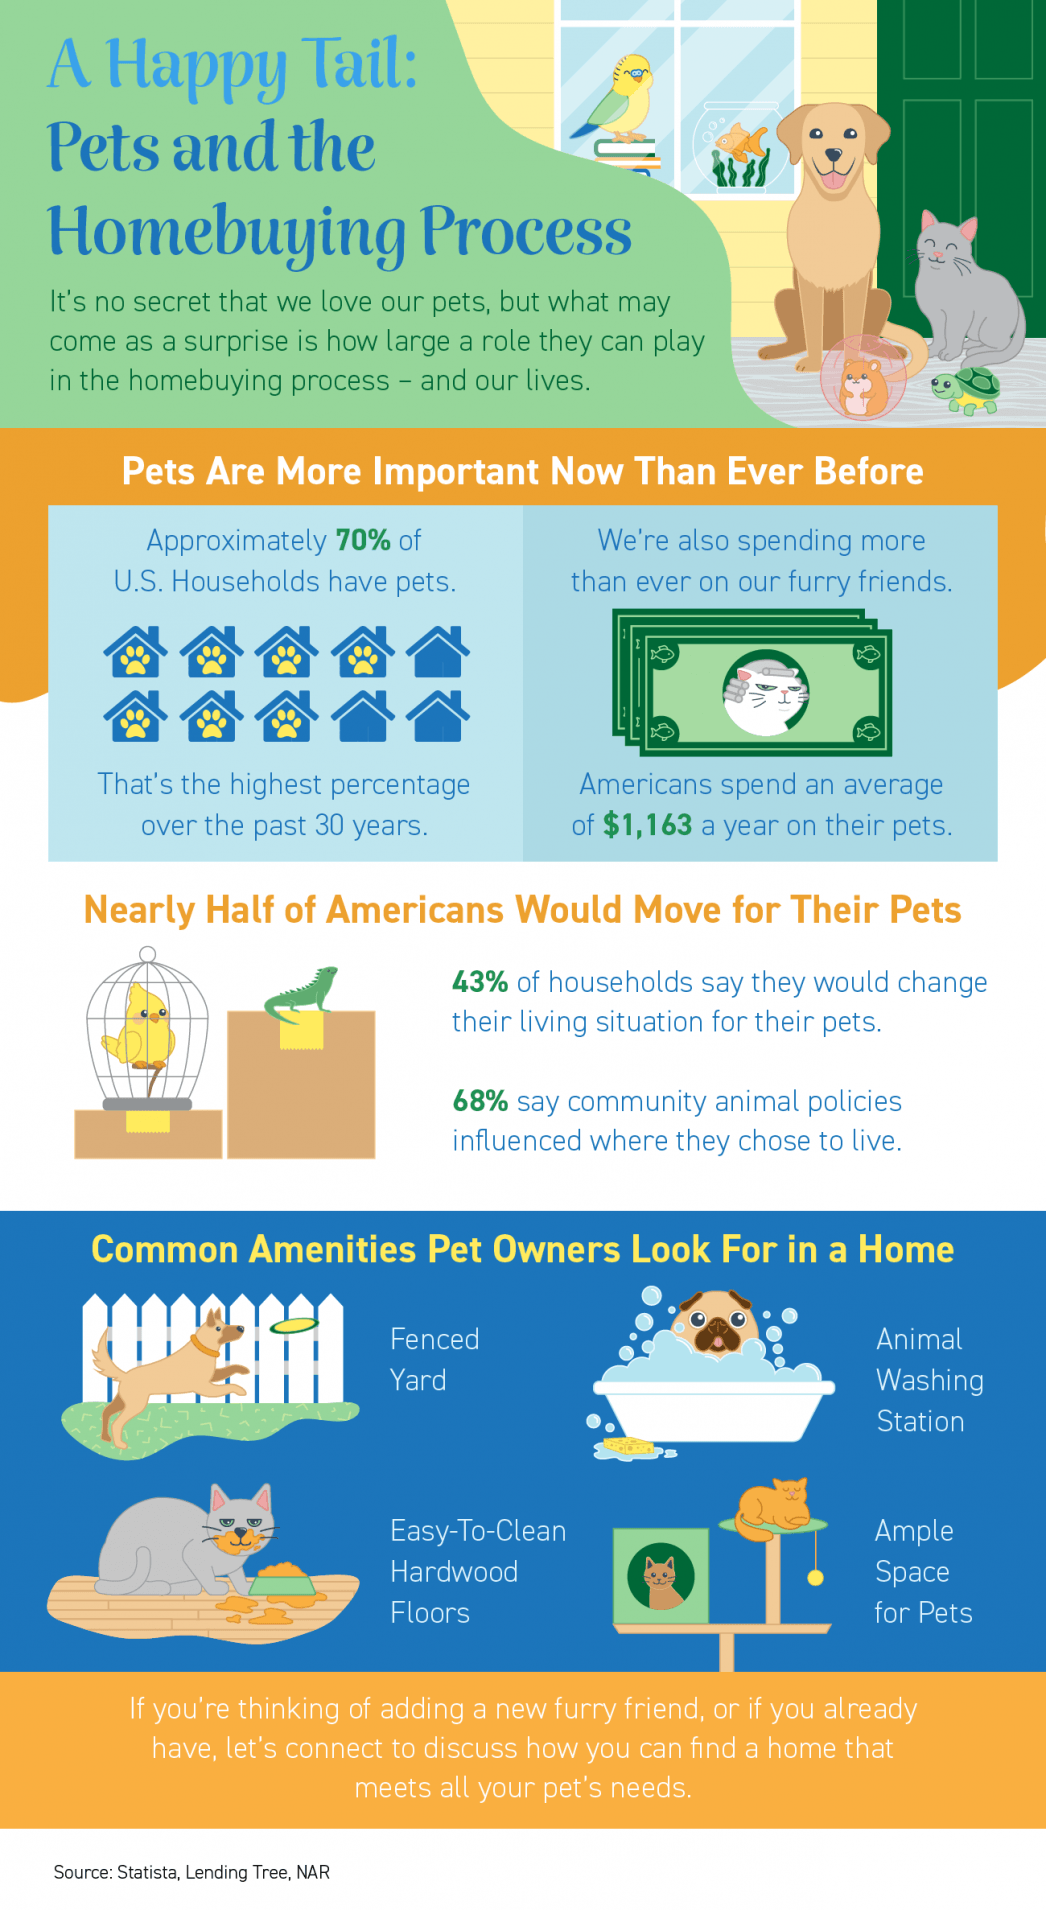 Pets and the Homebuying Process